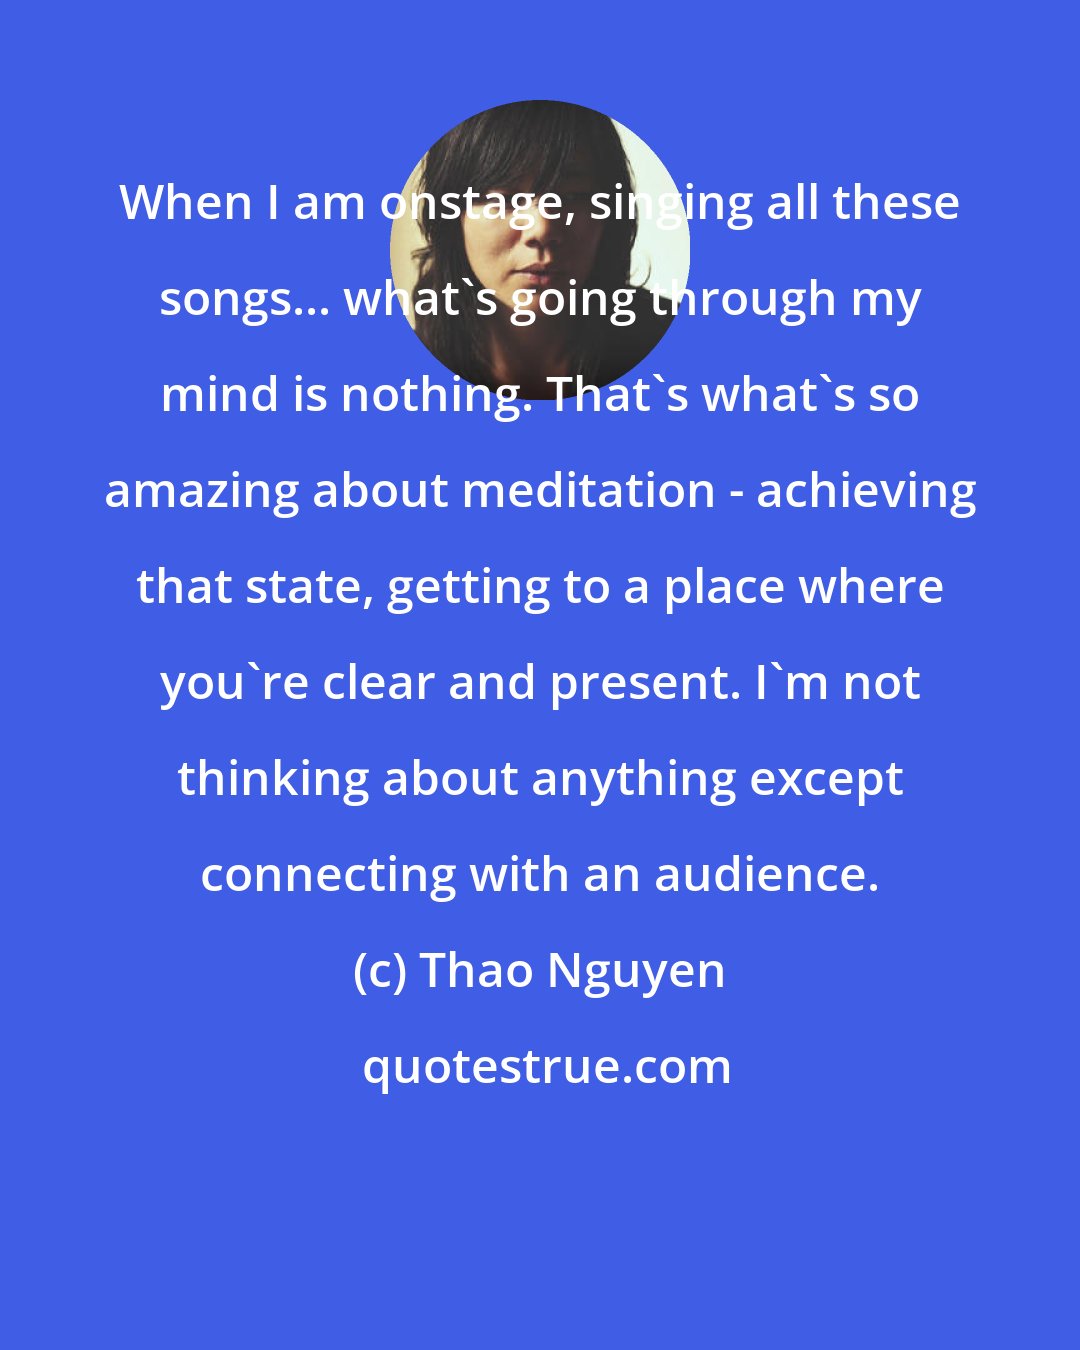 Thao Nguyen: When I am onstage, singing all these songs... what's going through my mind is nothing. That's what's so amazing about meditation - achieving that state, getting to a place where you're clear and present. I'm not thinking about anything except connecting with an audience.